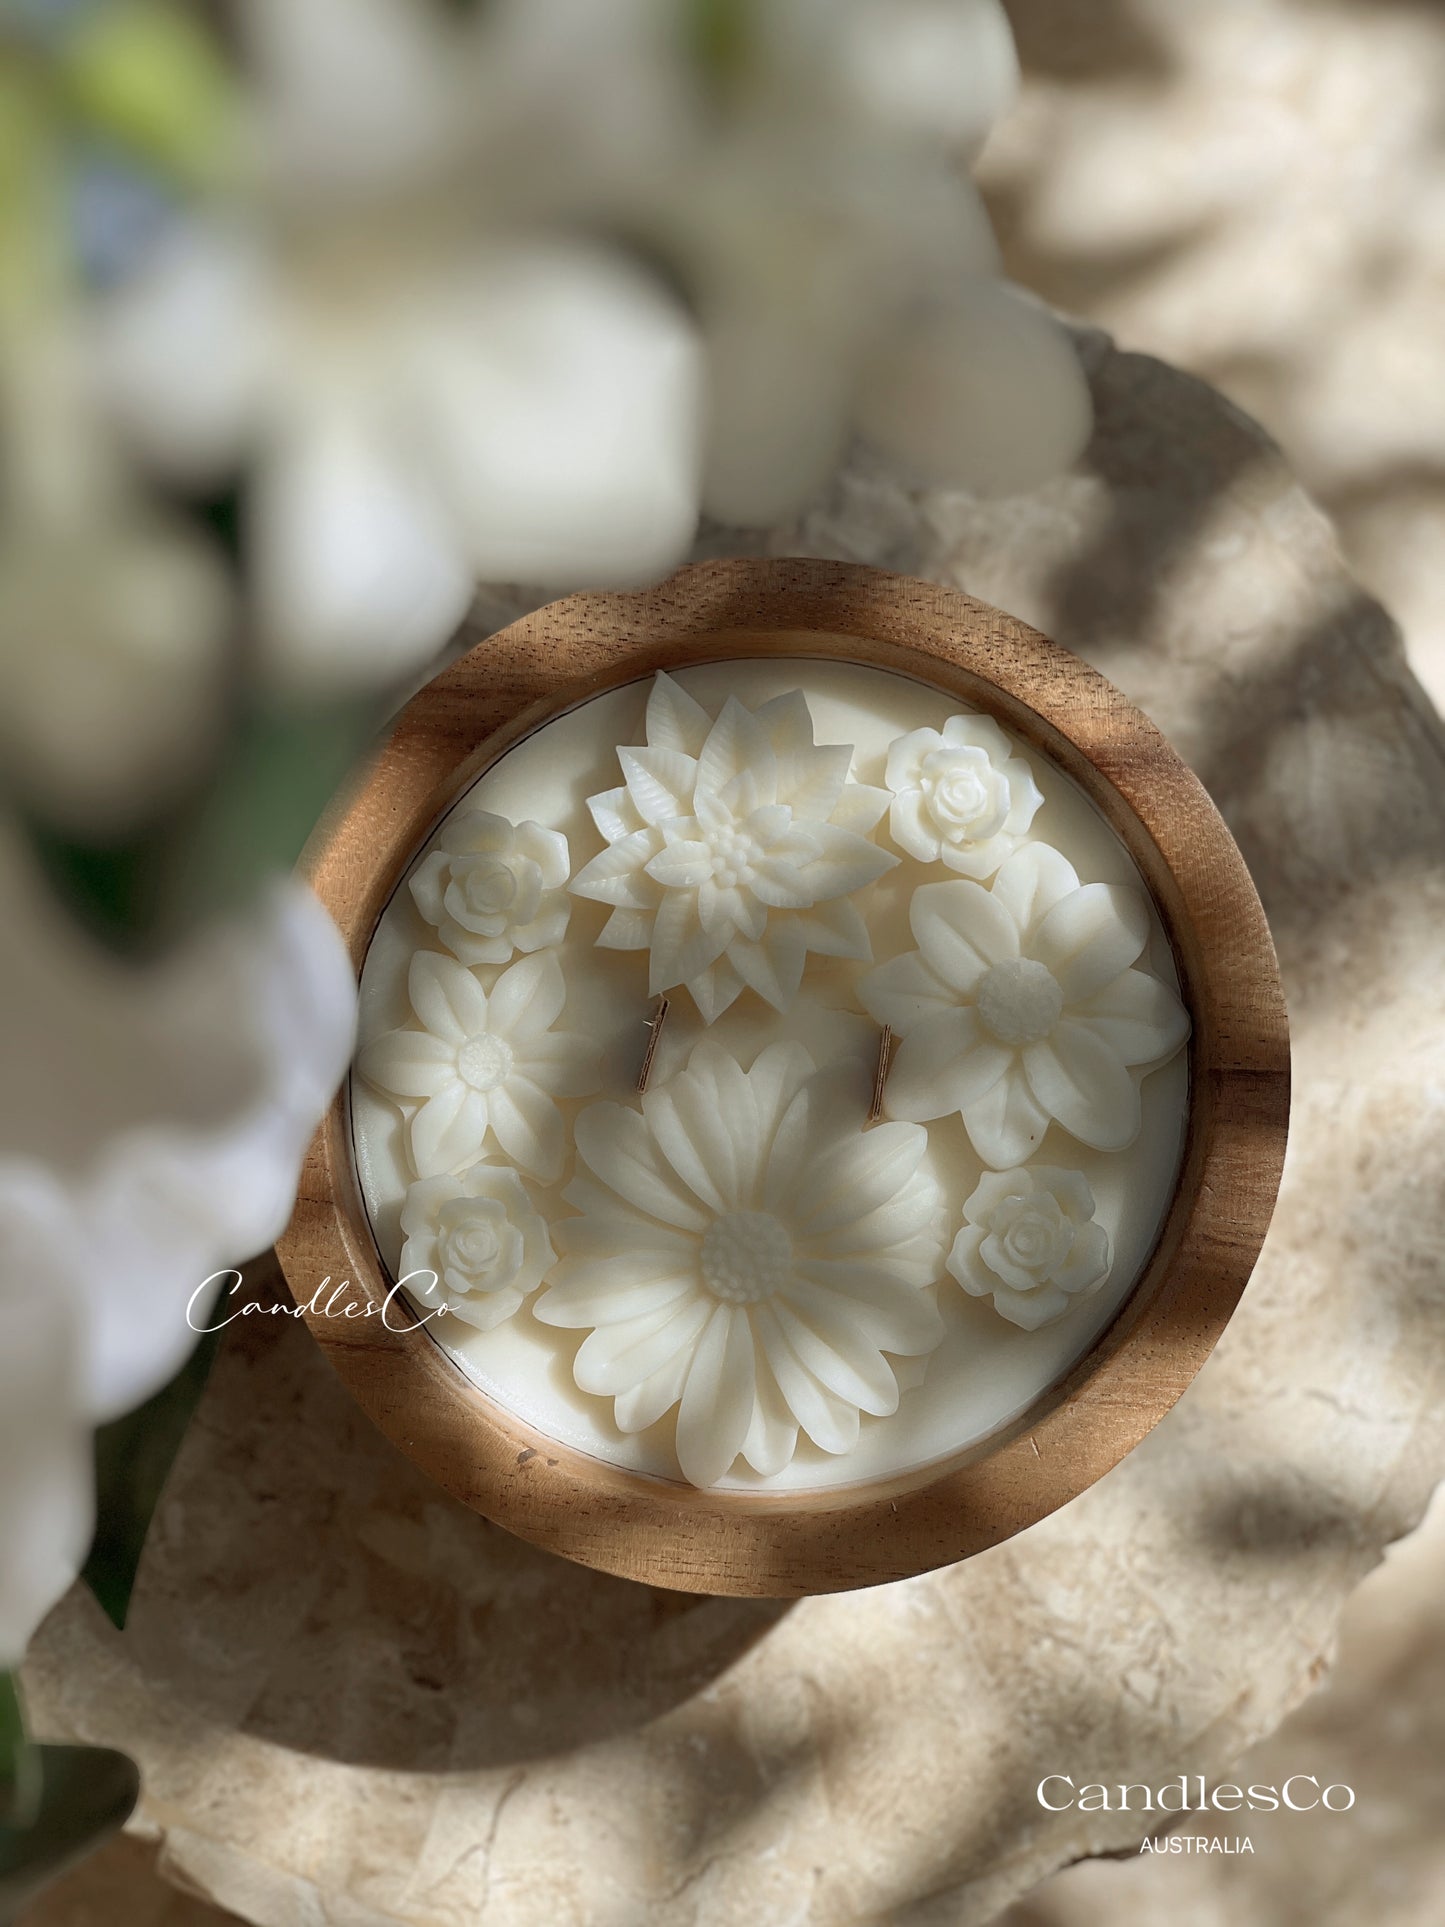 Scented Floral Wooden Acacia Bowl